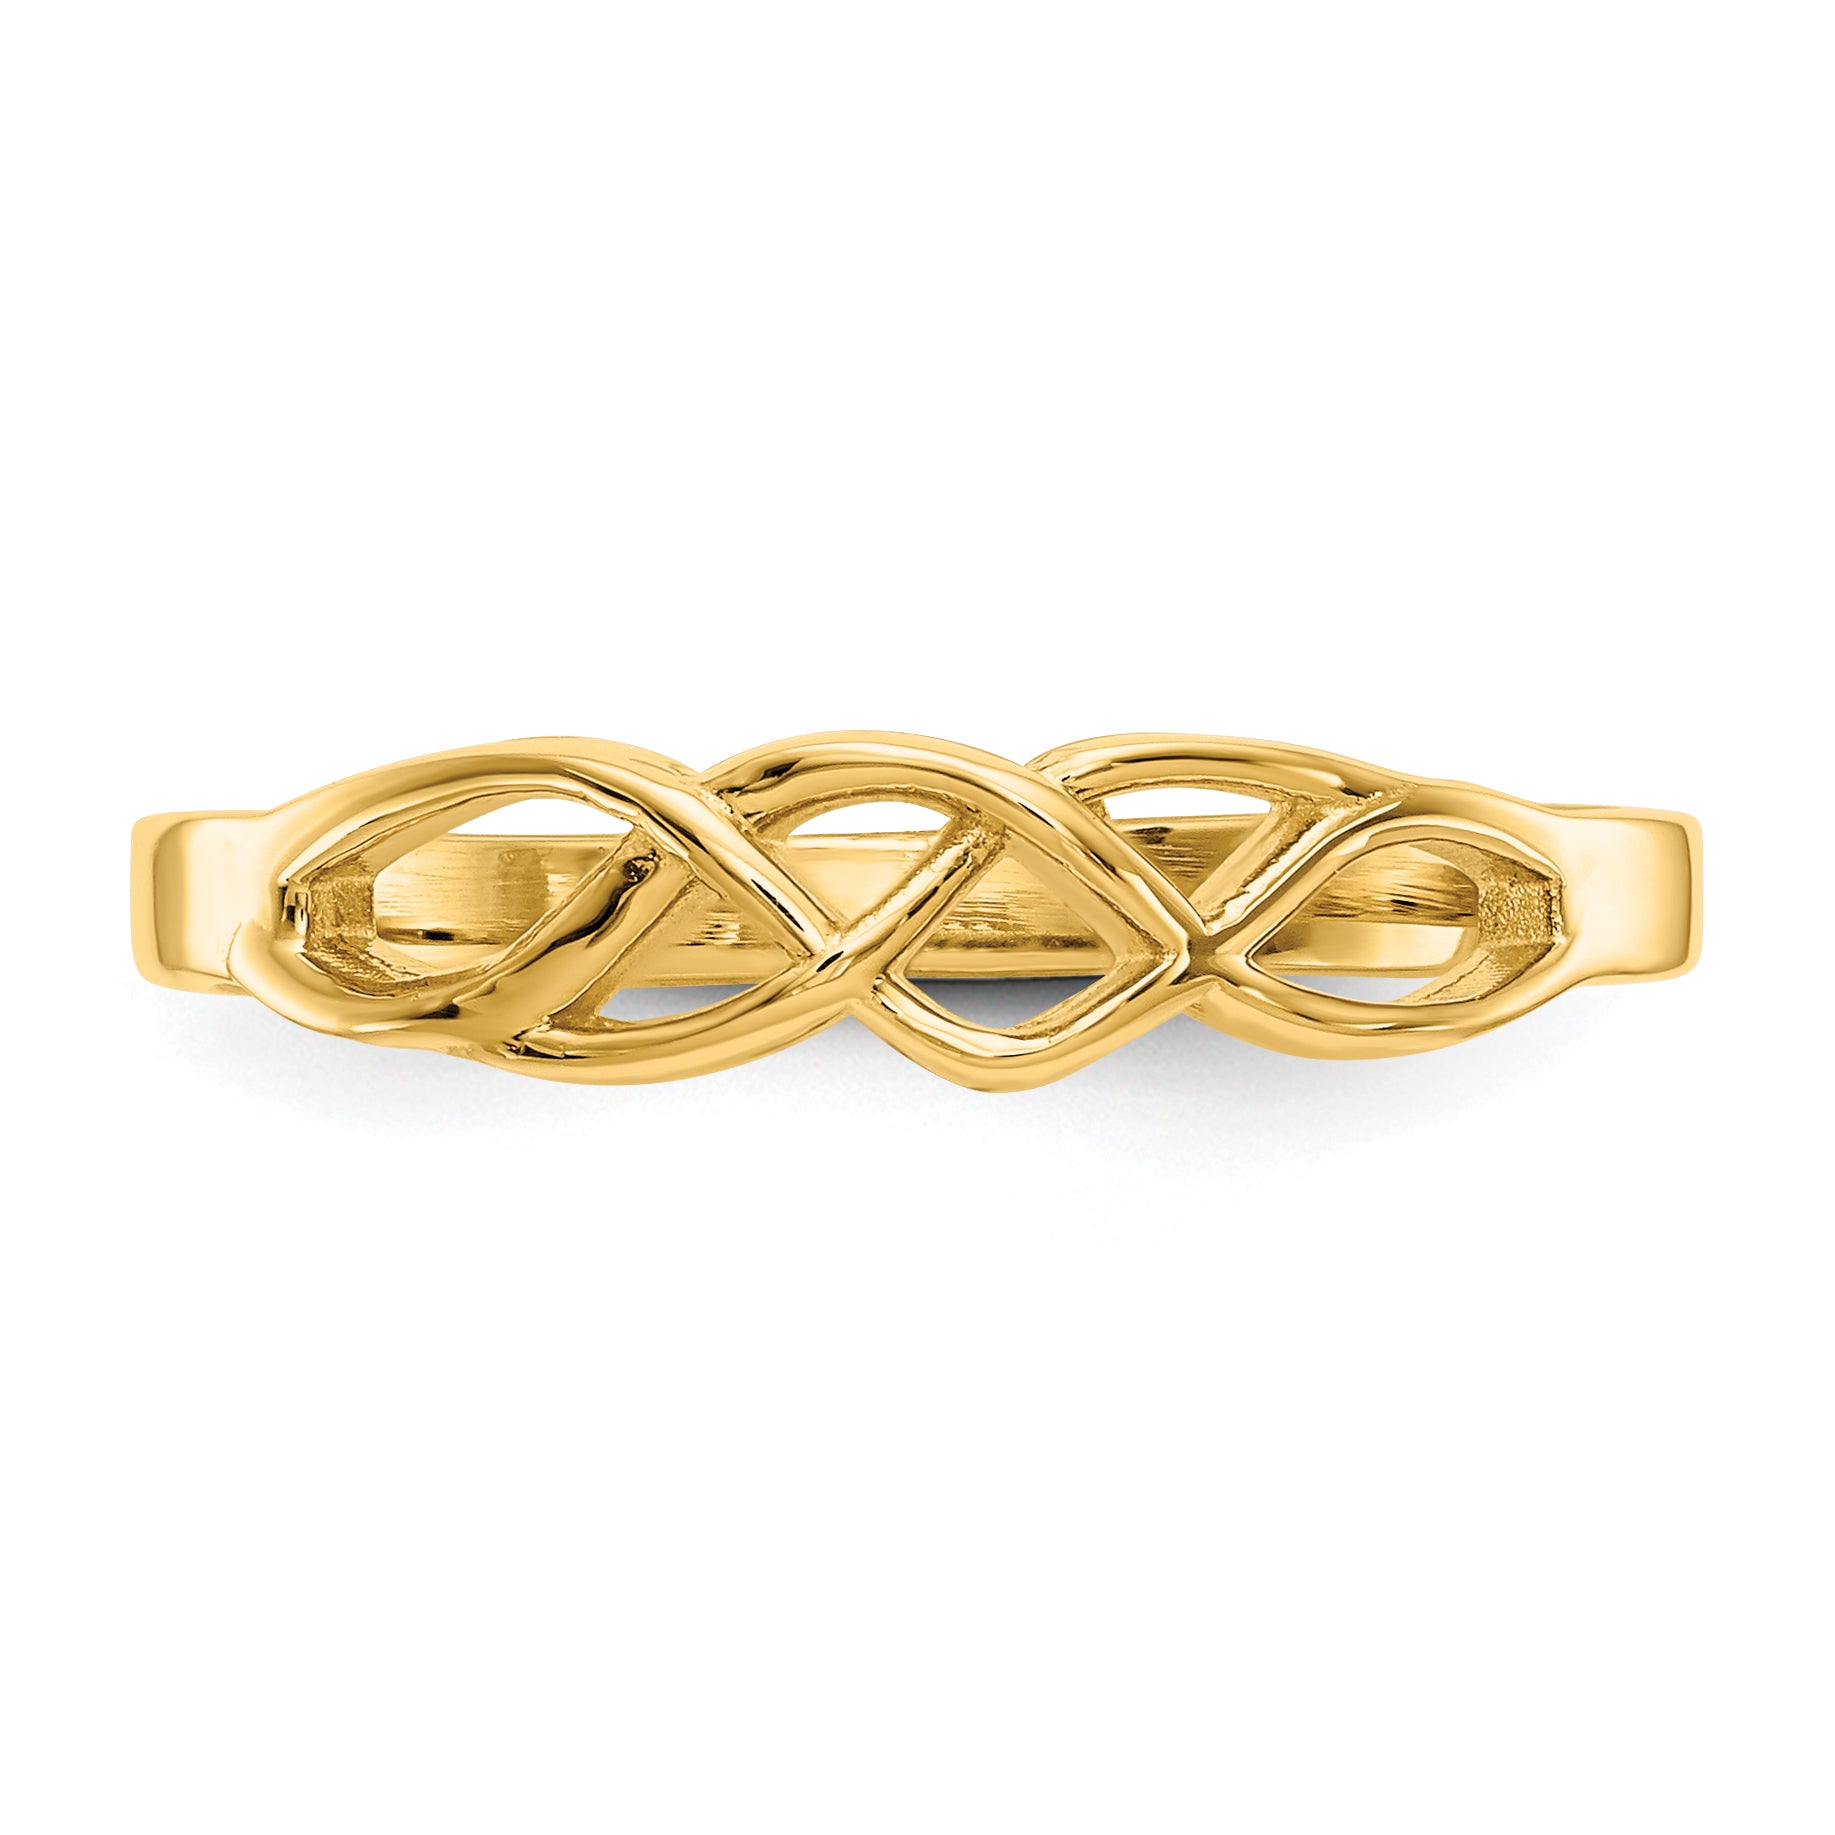 10k Free Form Knot Ring